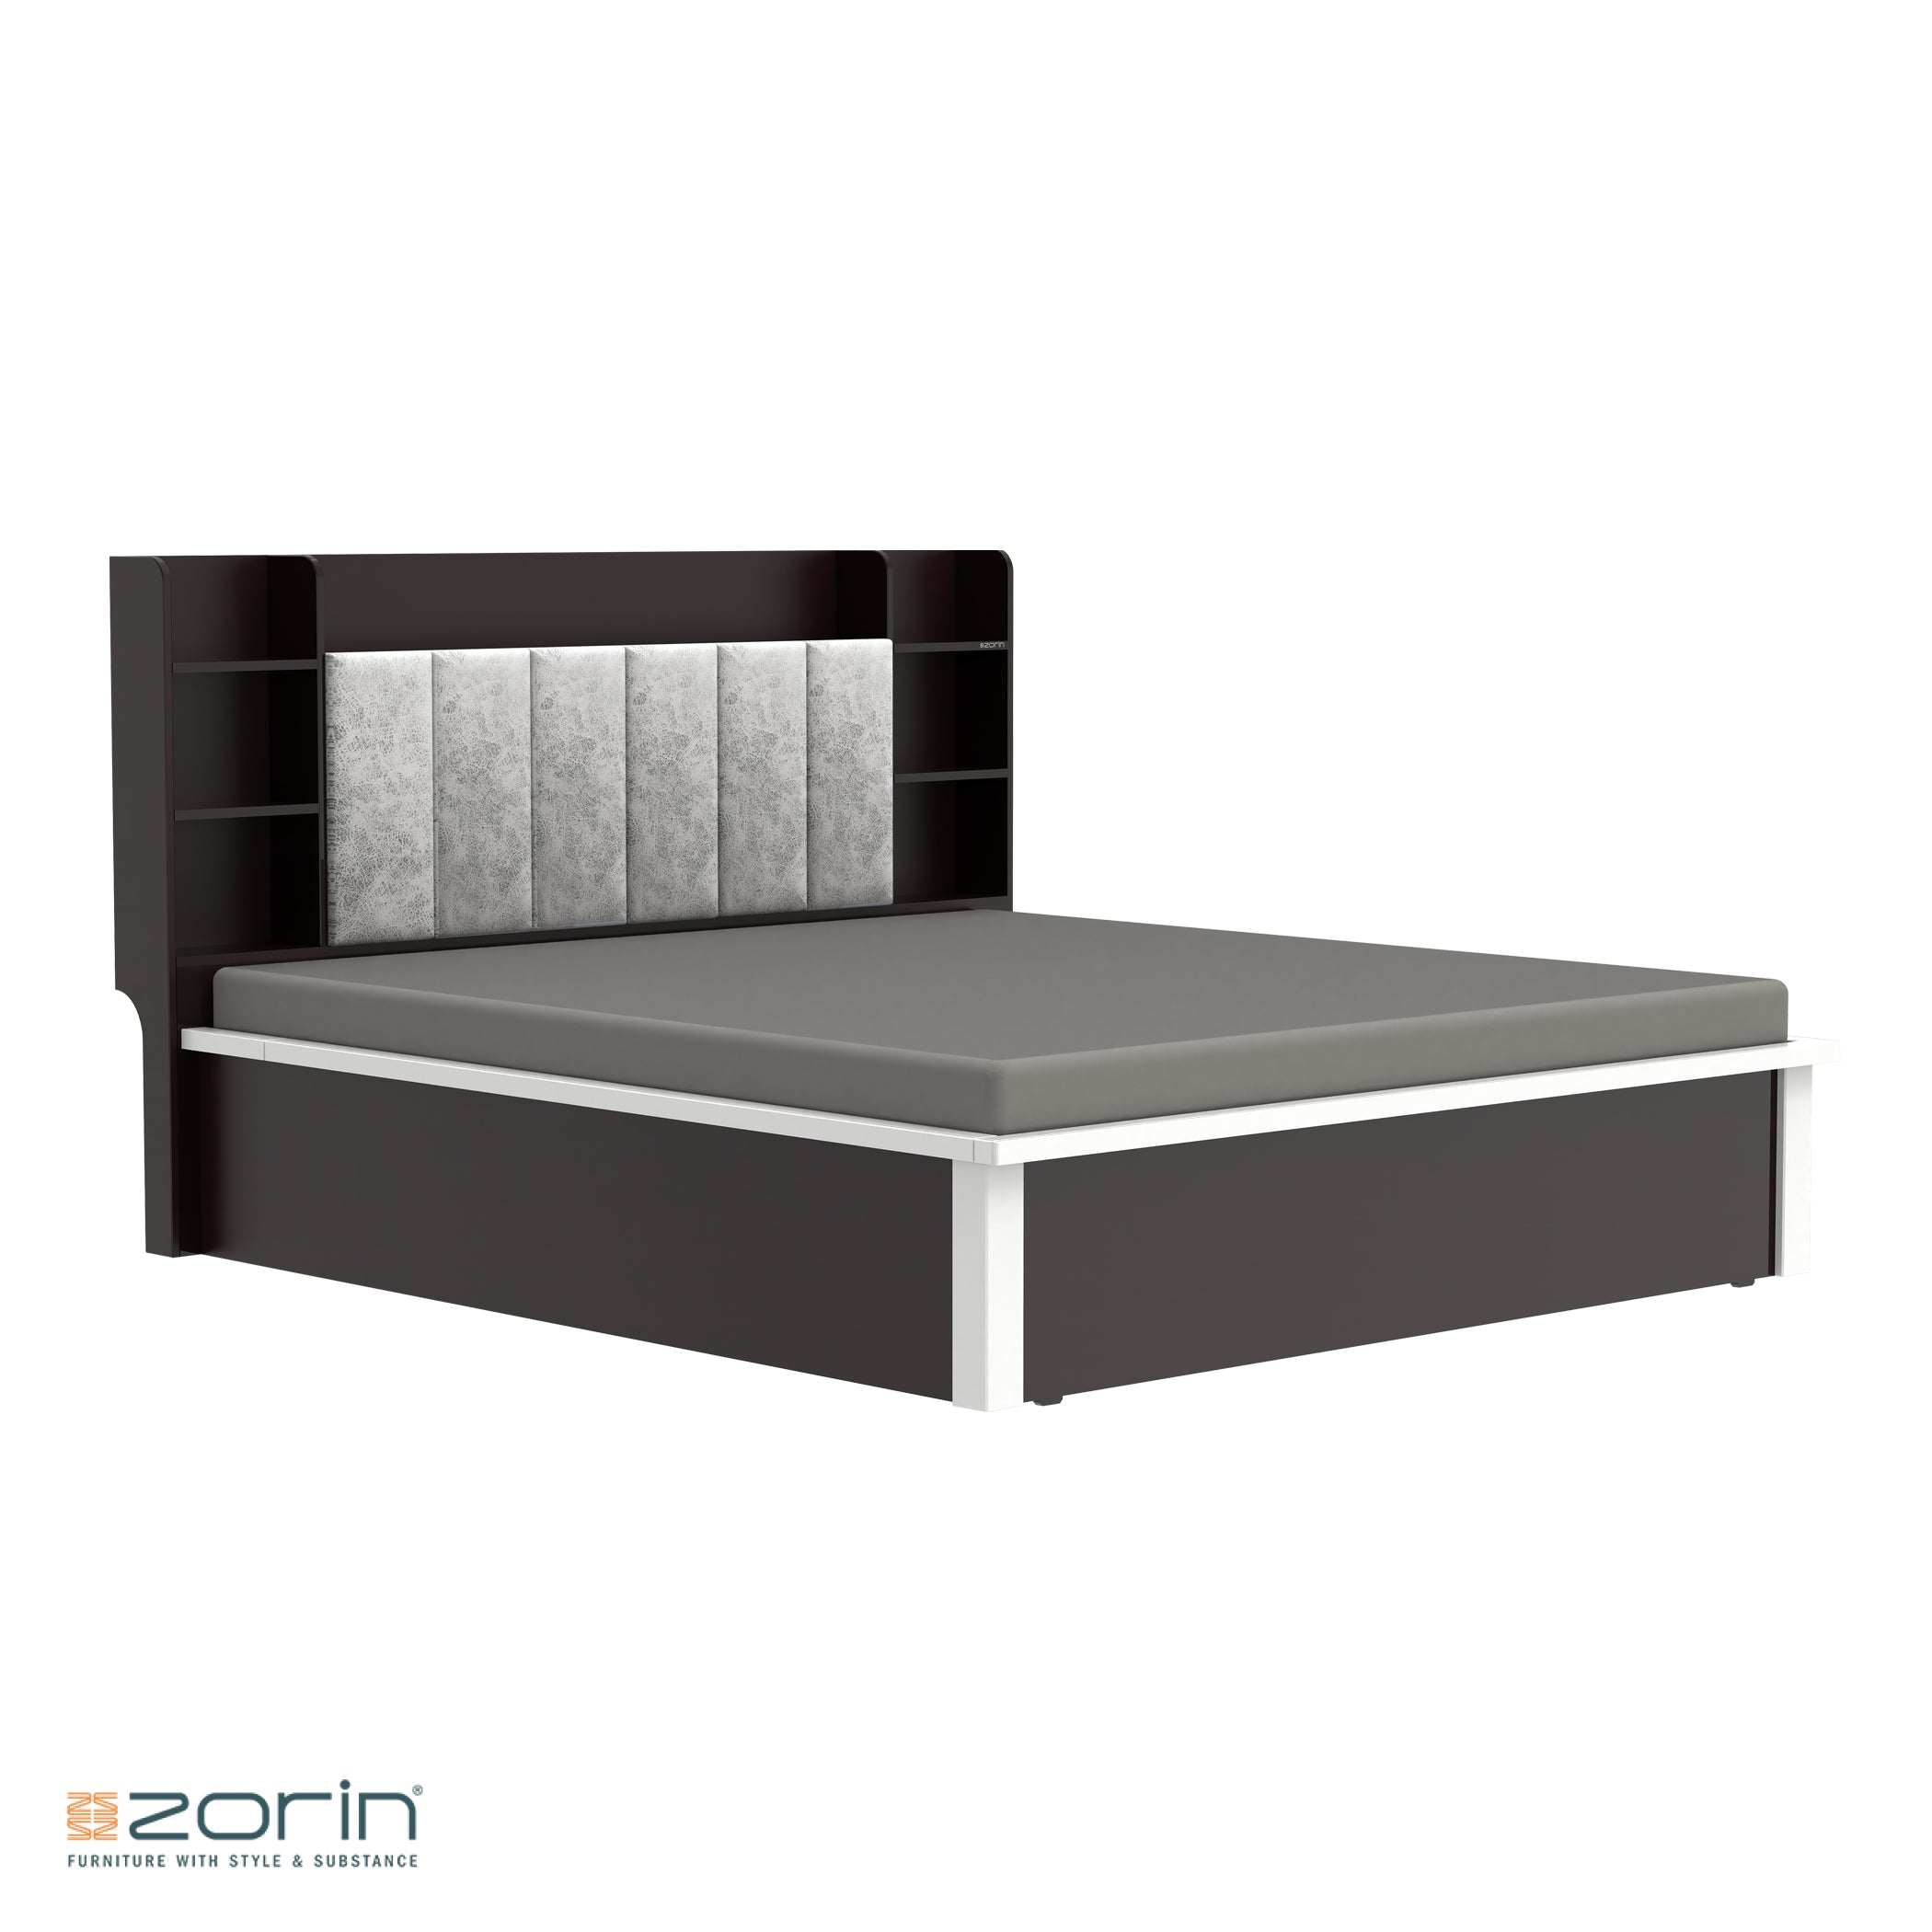 Manor King Bed With Storage Zorin